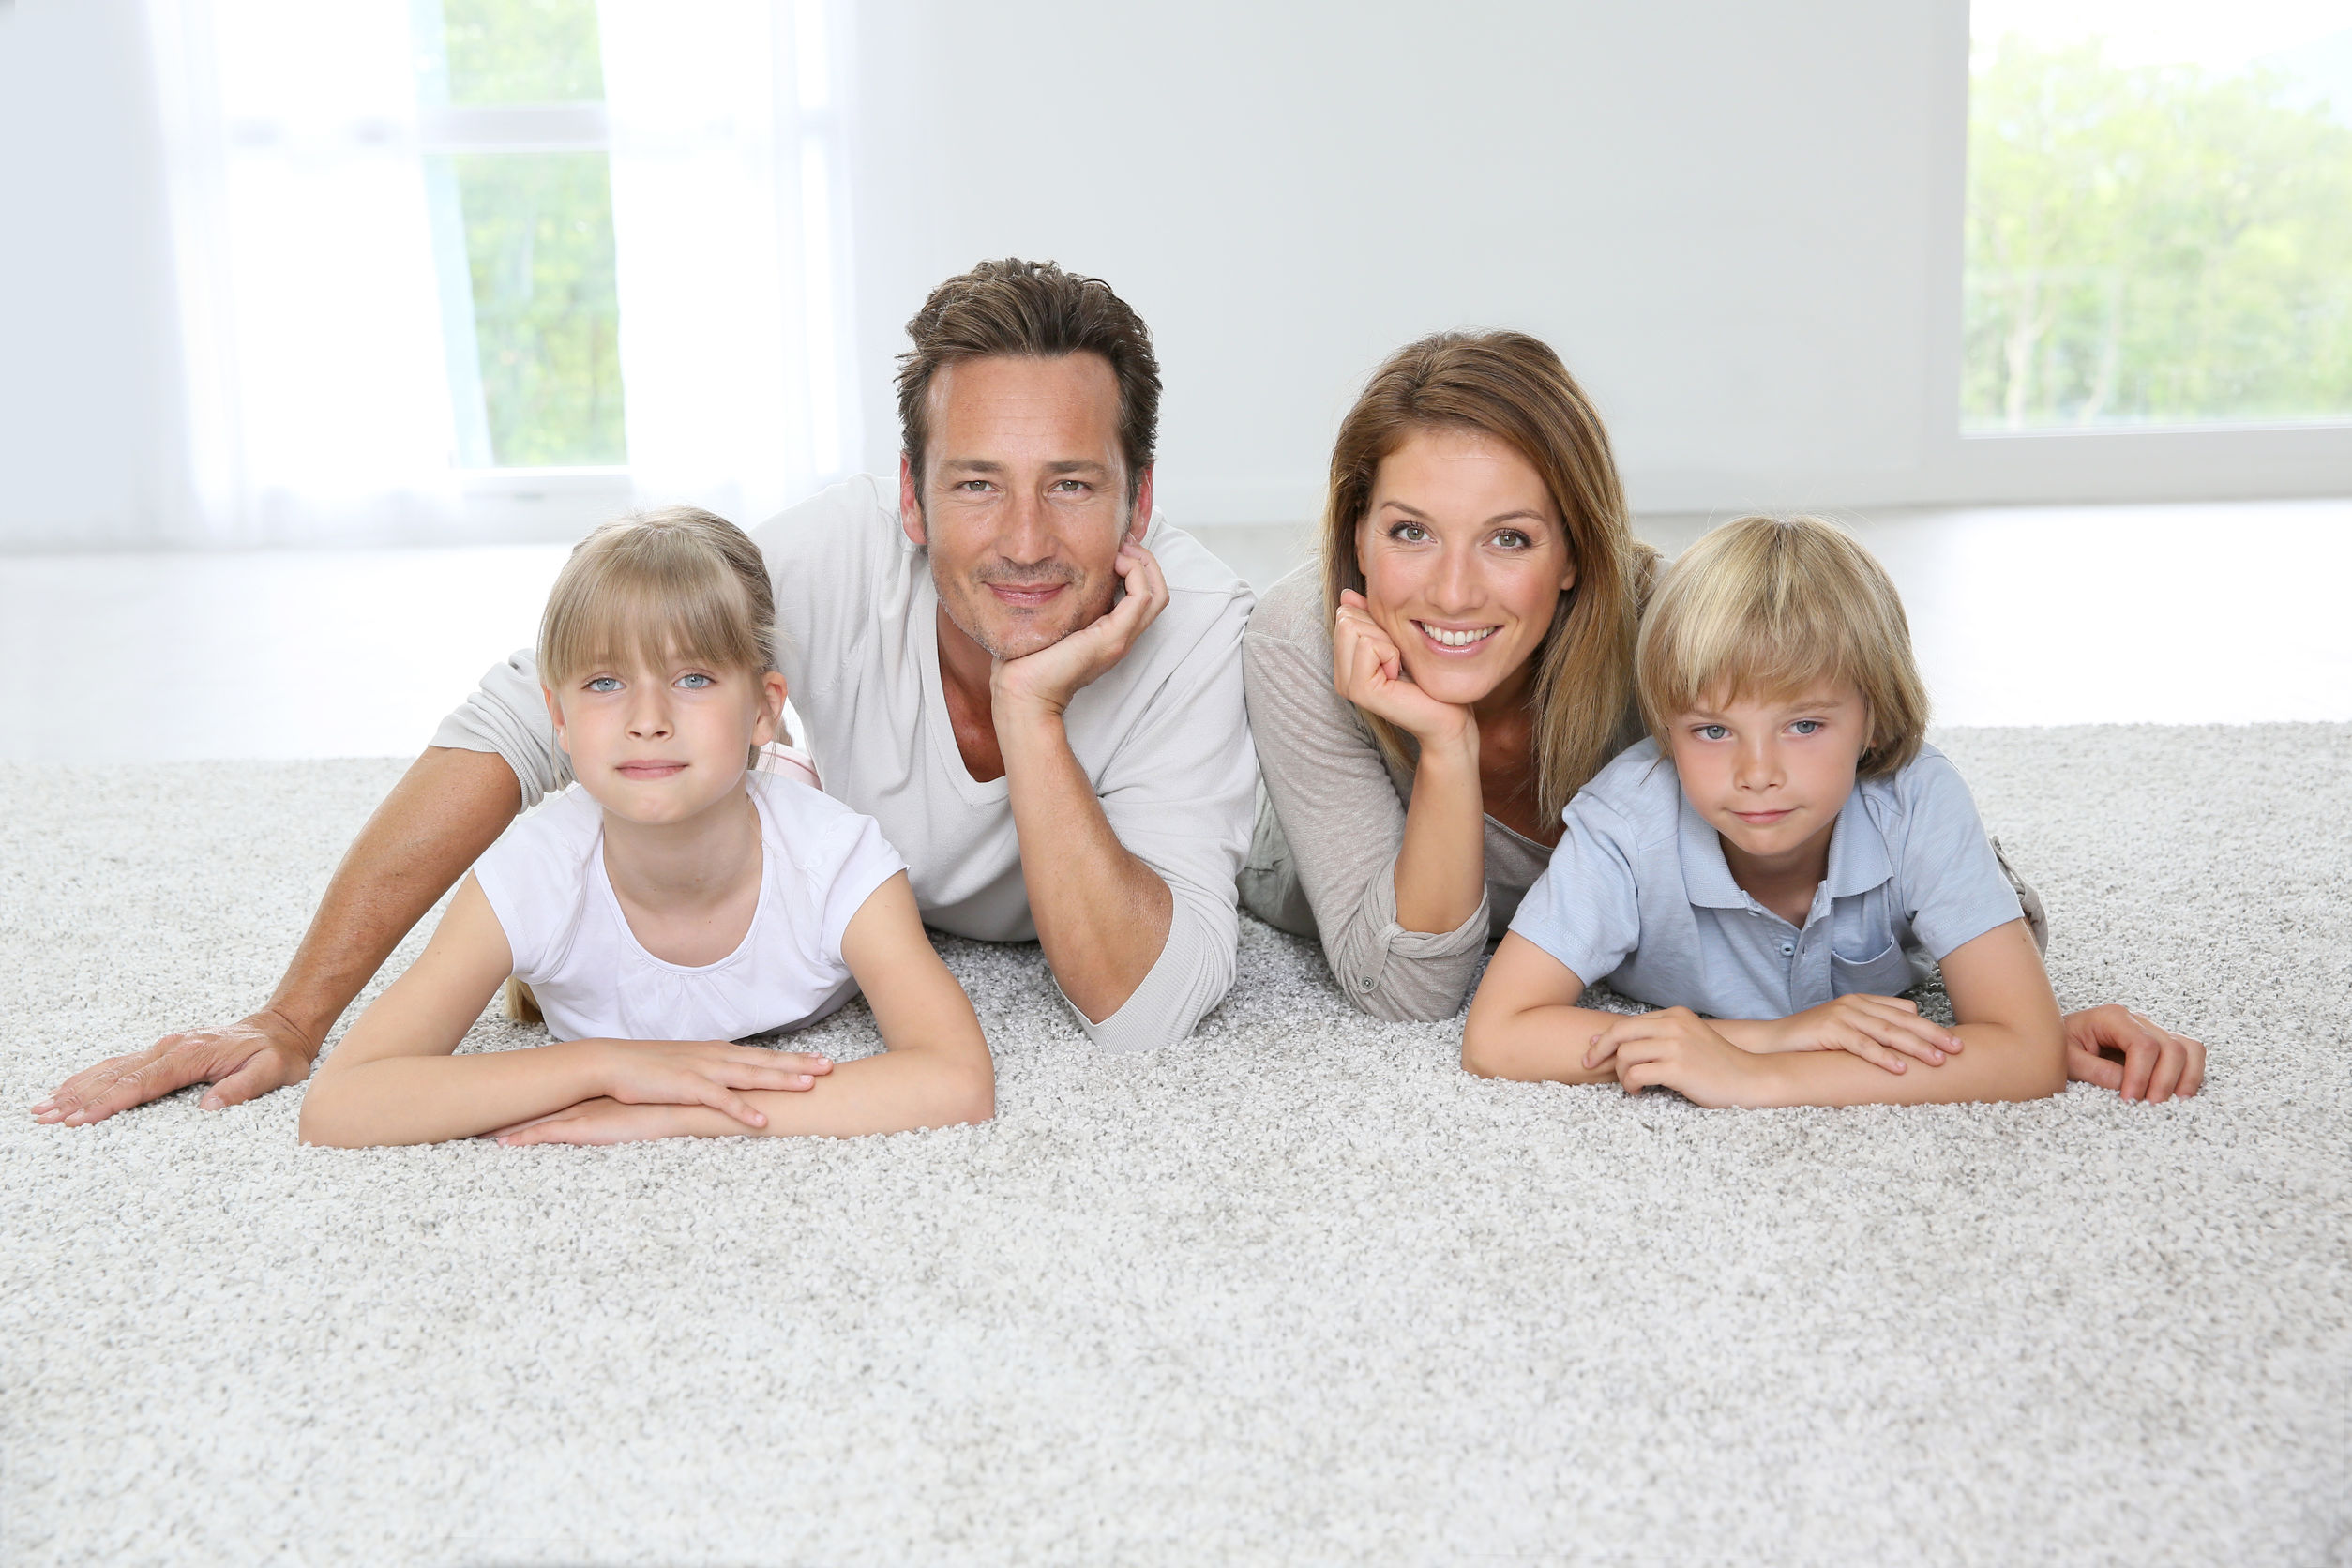 Happy family of four laying on carpet at home